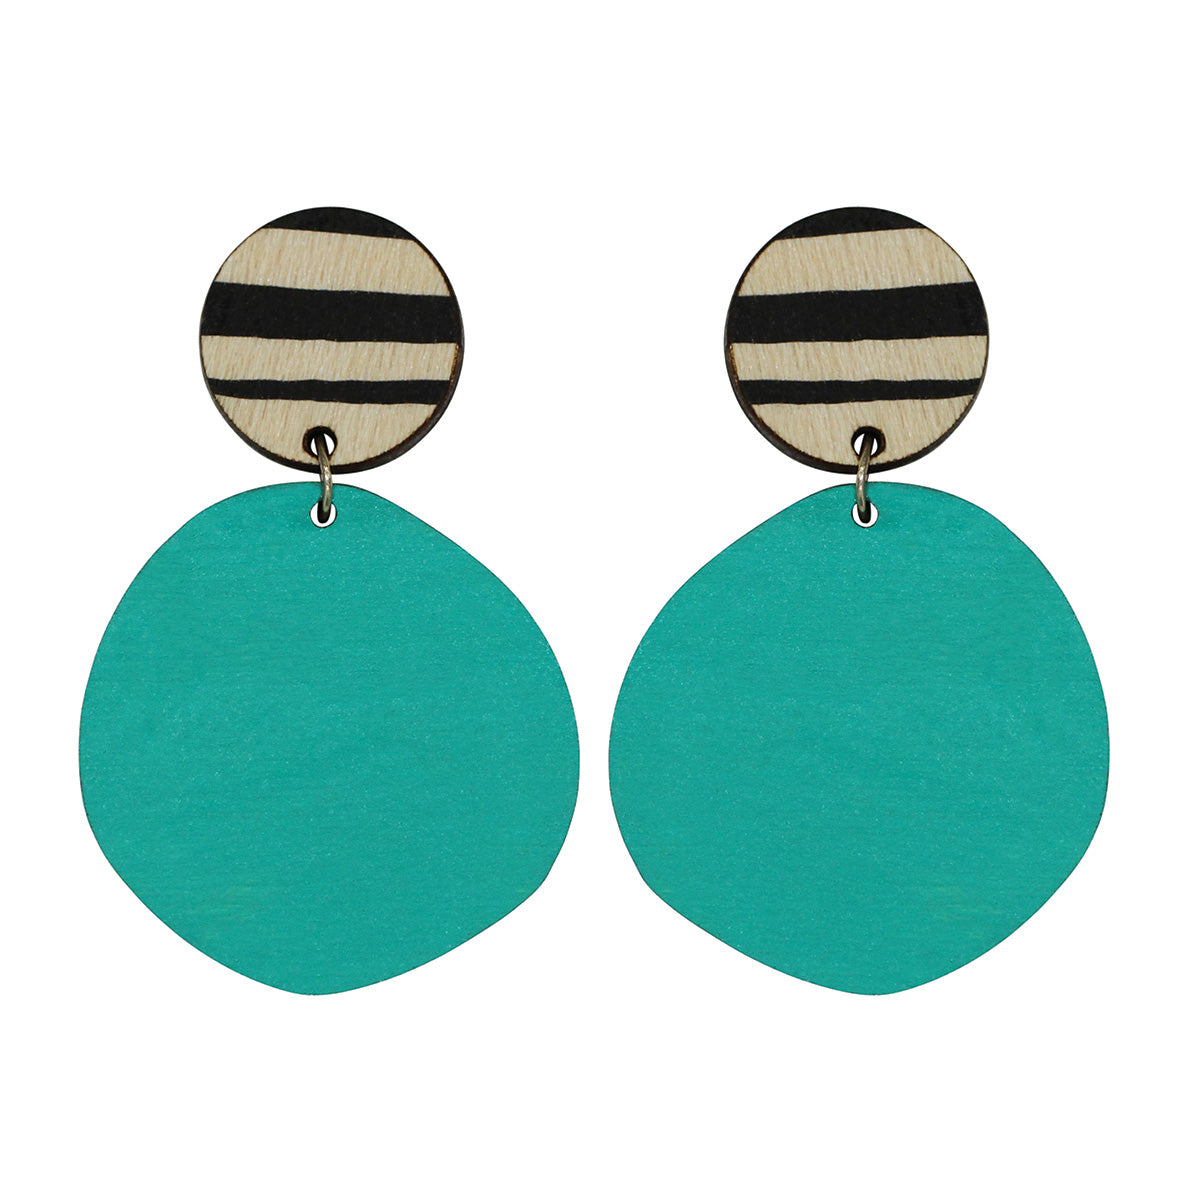 Retro statement earrings in aqua with thick lines